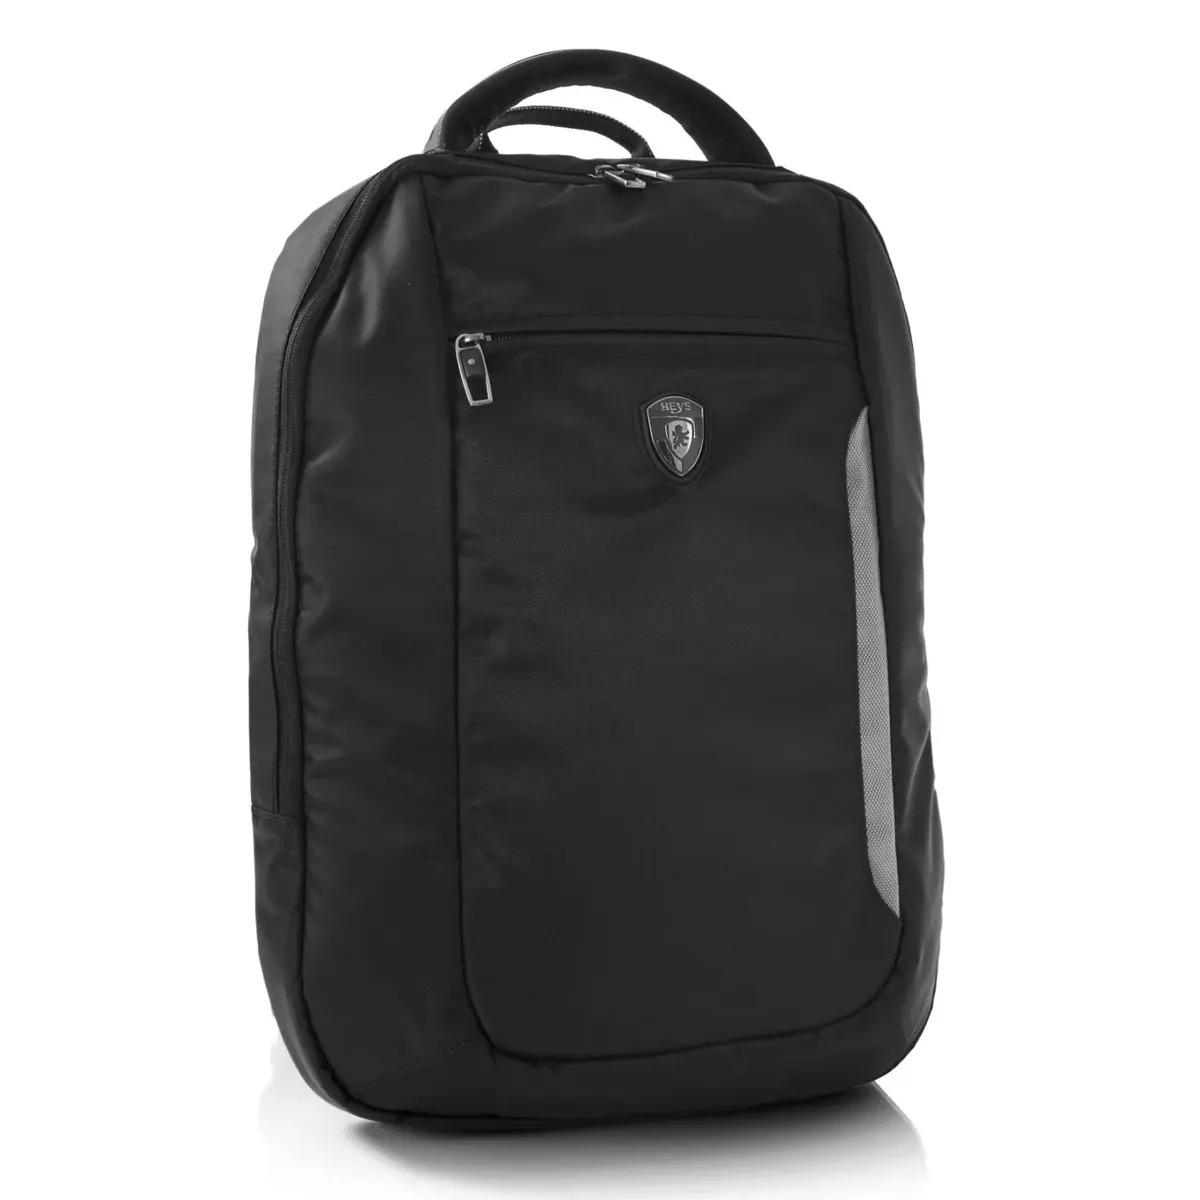 Heys America Techpac 05 One Size Backpack for $19.99 Shipped